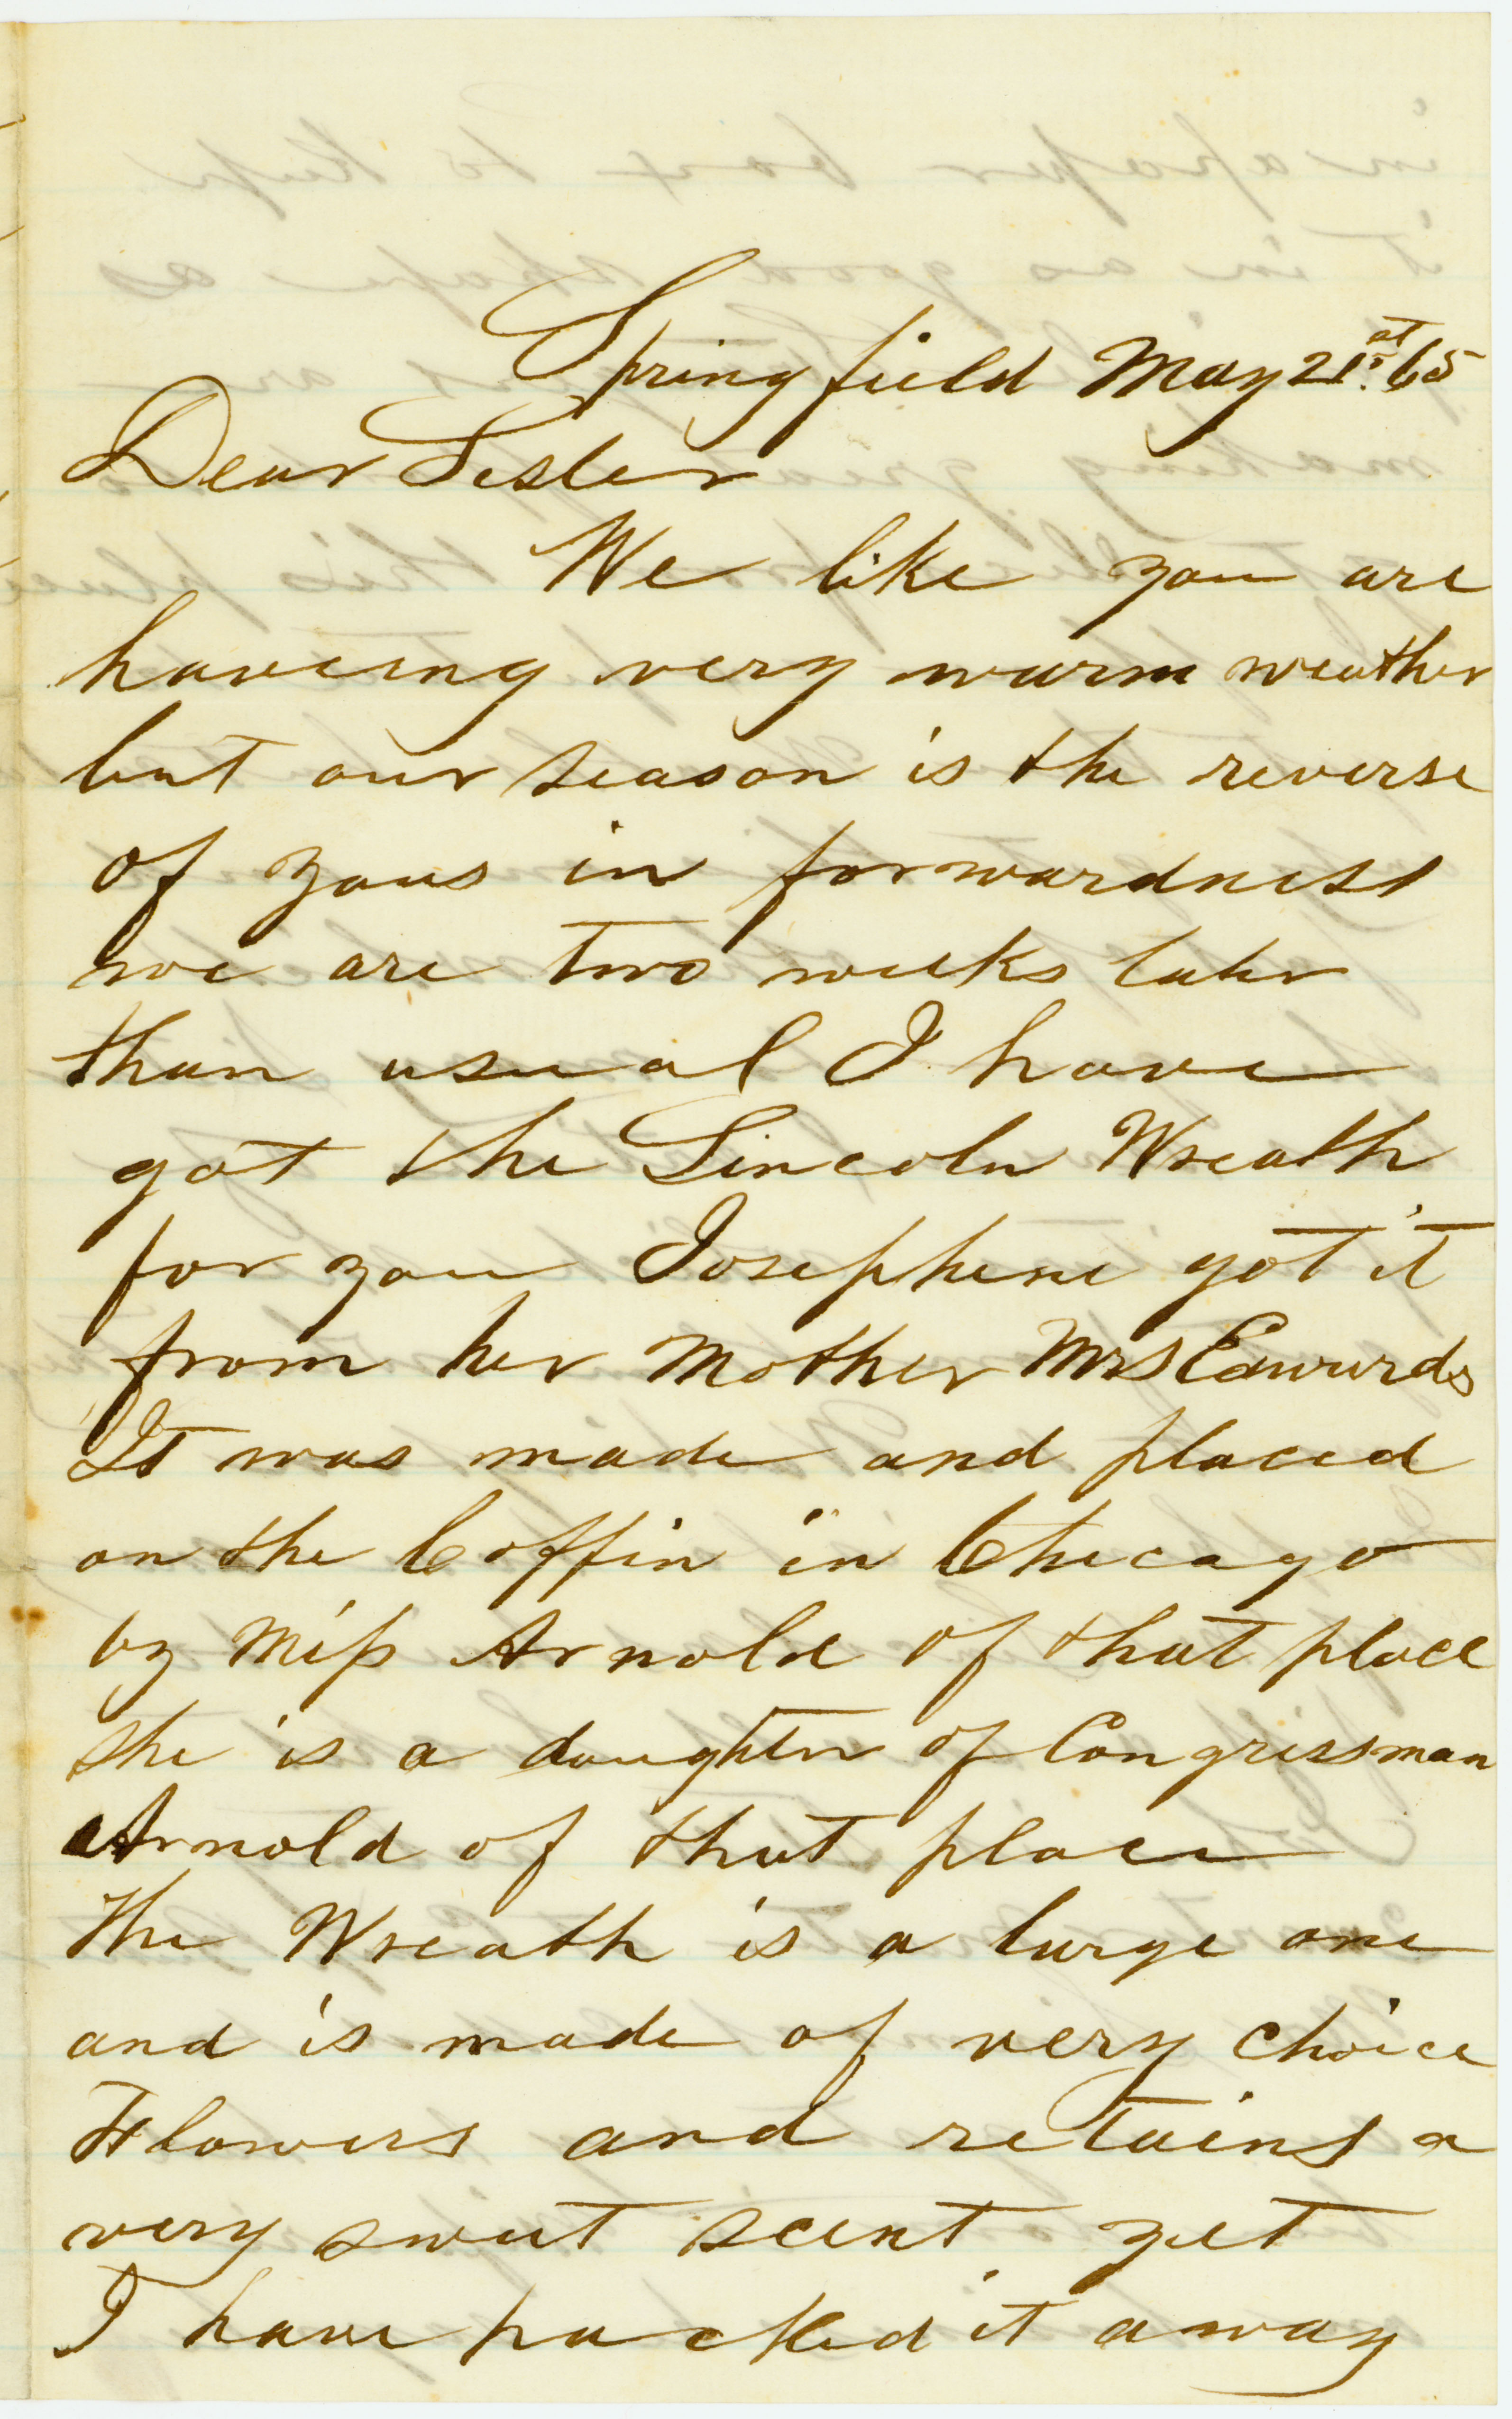 Letter of A. M. Black, Springfield, to Sister [Jane Black], May 21, 1865